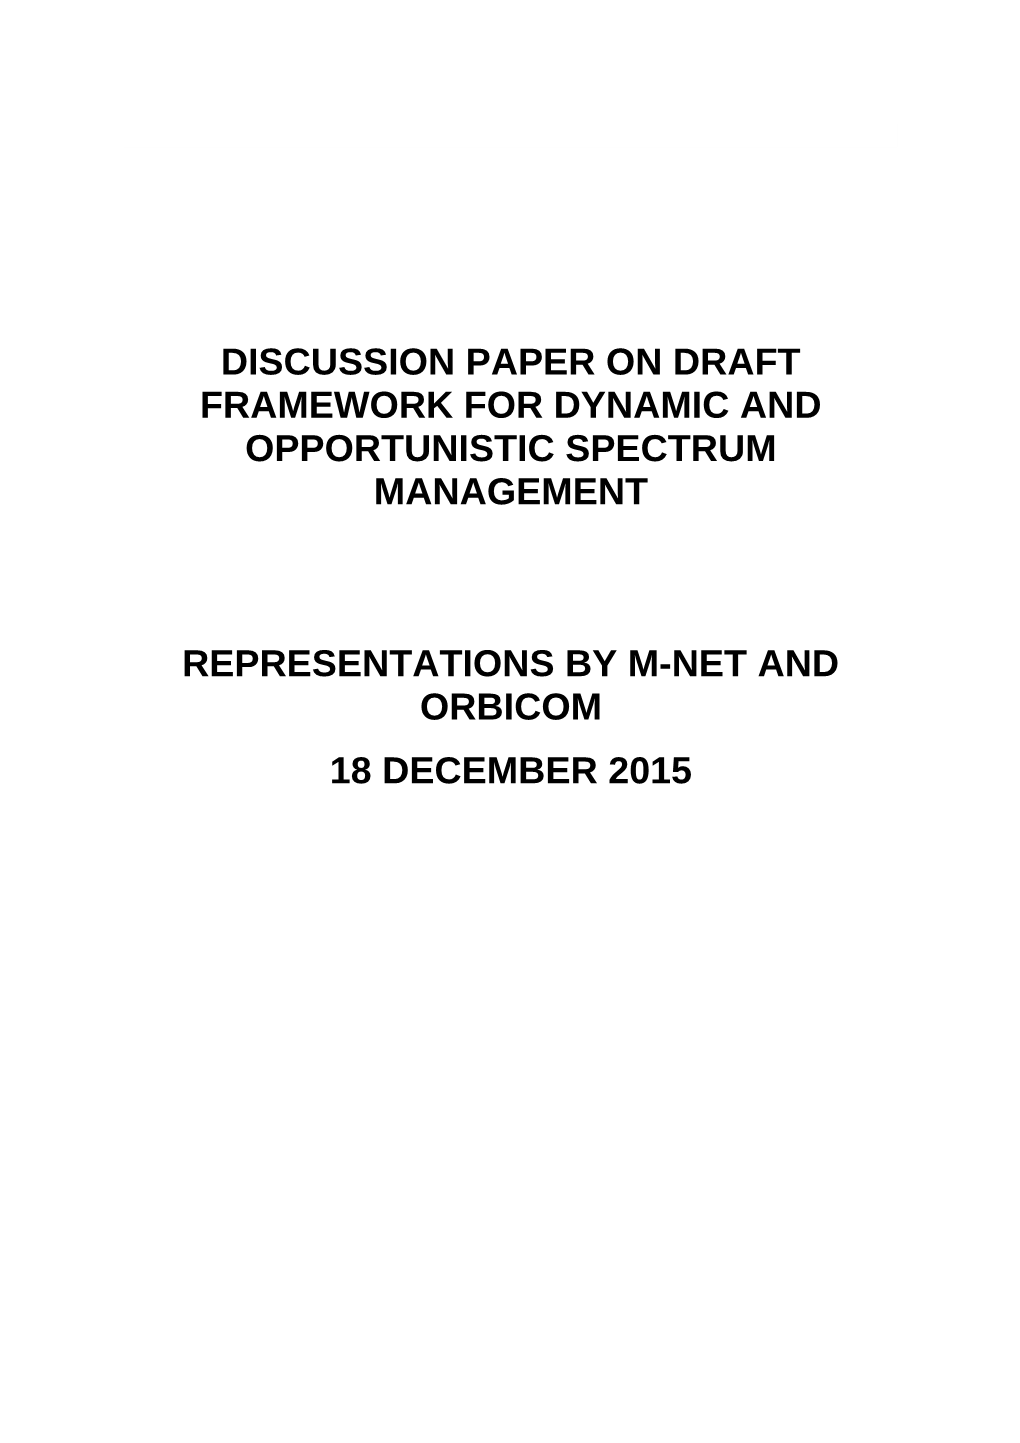 Discussion Paper on Draft Framework for DYNAMIC and OPPORTUNISTIC SPECTRUM MANAGEMENT